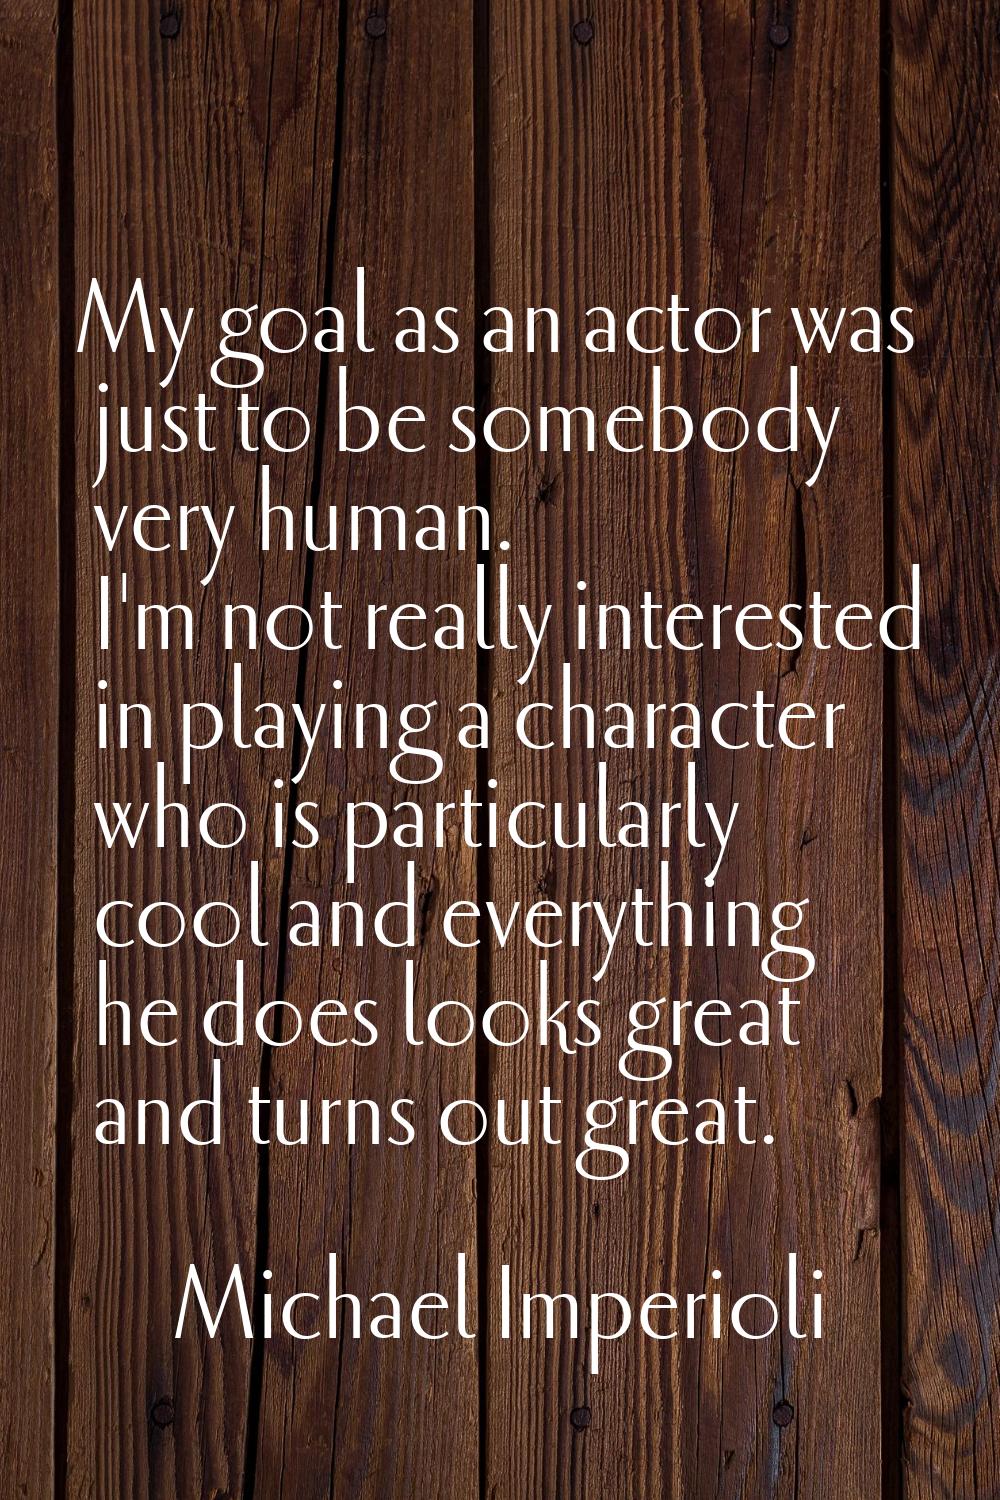 My goal as an actor was just to be somebody very human. I'm not really interested in playing a char